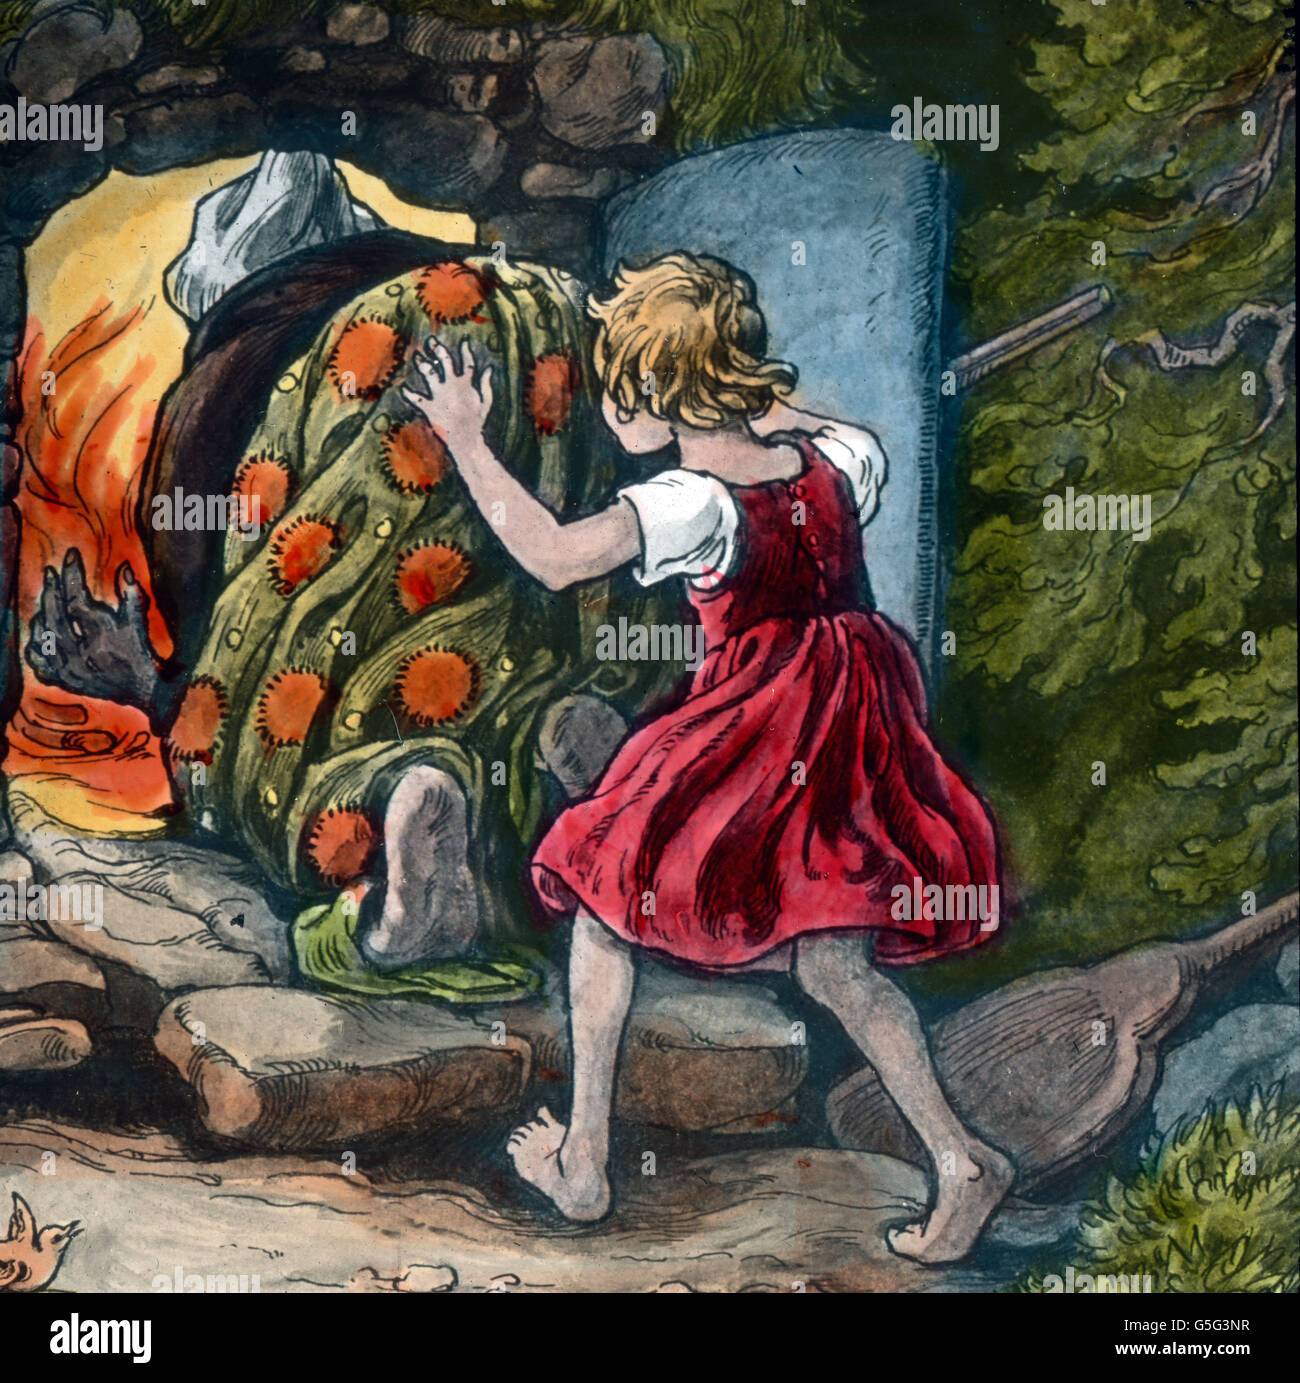 Hänsel und Gretel. Hansel and Gretel. history, historical, 1910s, 1920s,  20th century, archive, Carl Simon, hand coloured glass slide, fairy tale,  Grimm Brothers, legend, myth, girl, sister, woman, witch, old, oven, poking,